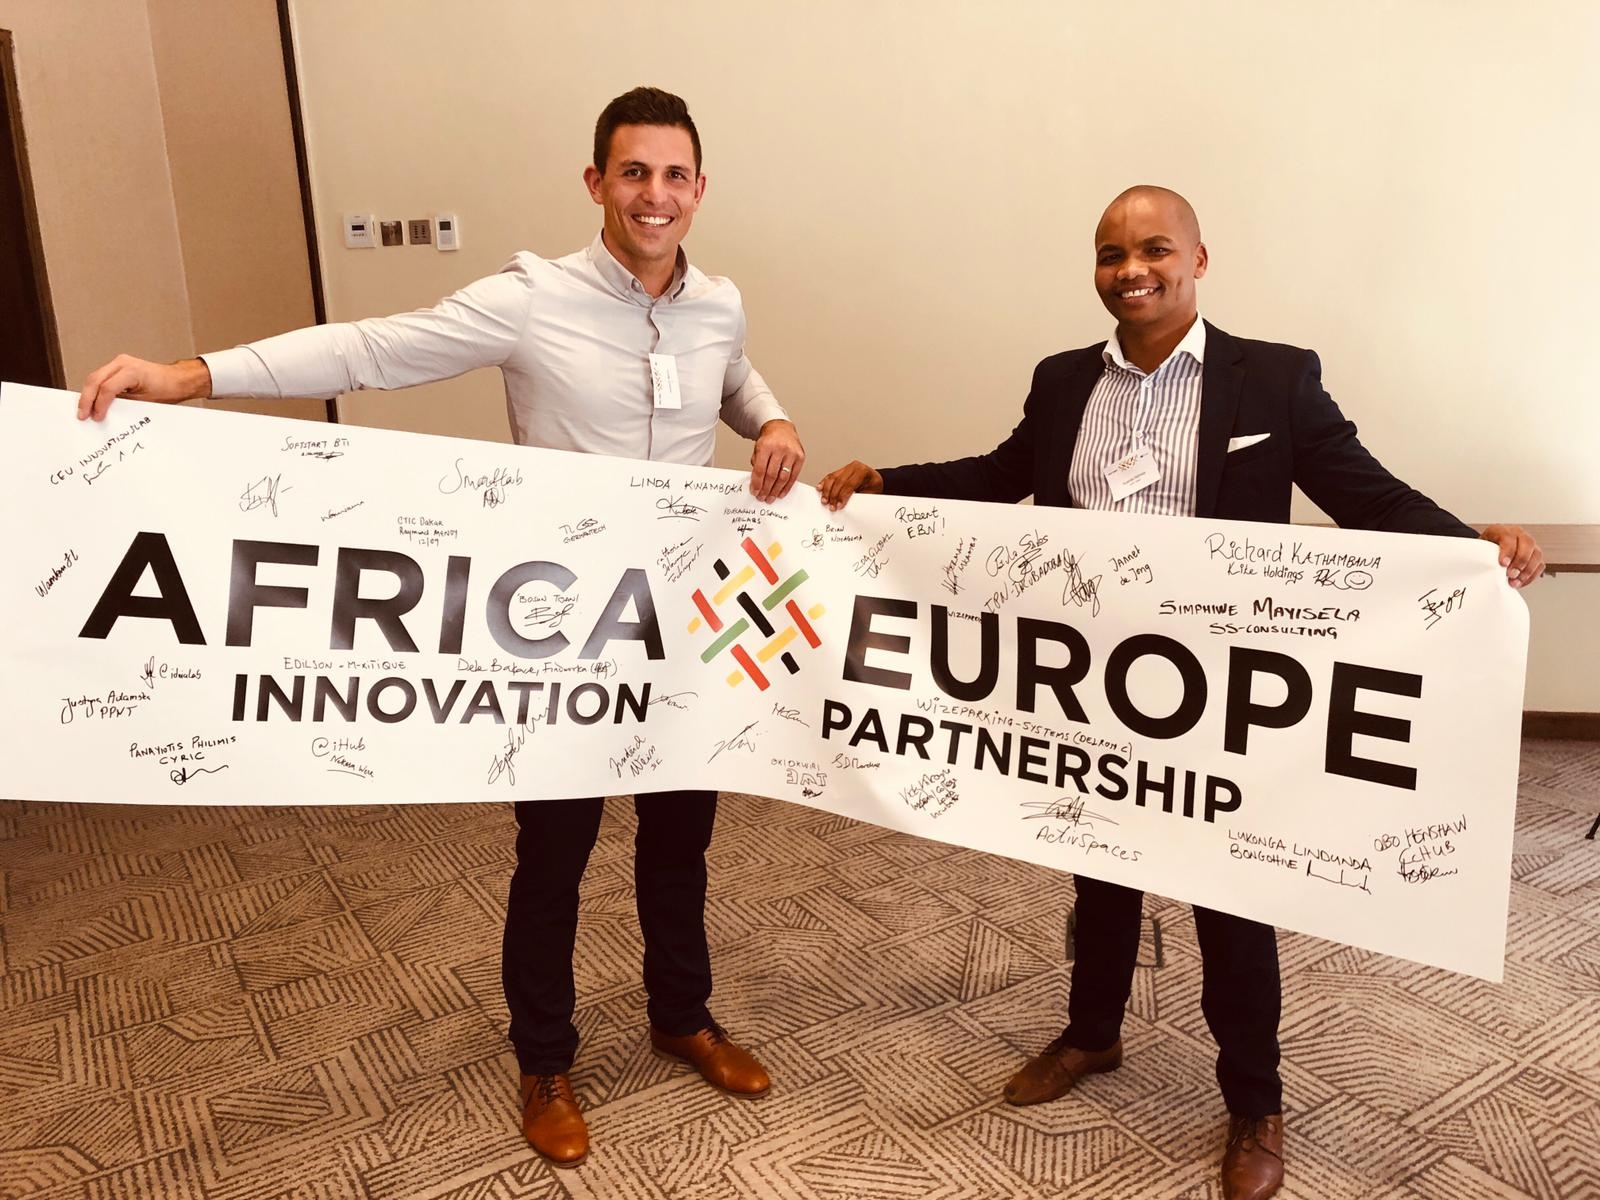 The Czech Republic is a supporter of the African-European Innovation Partnership. The Czech representative of JIC will be cooperating with an incubator from South Africa